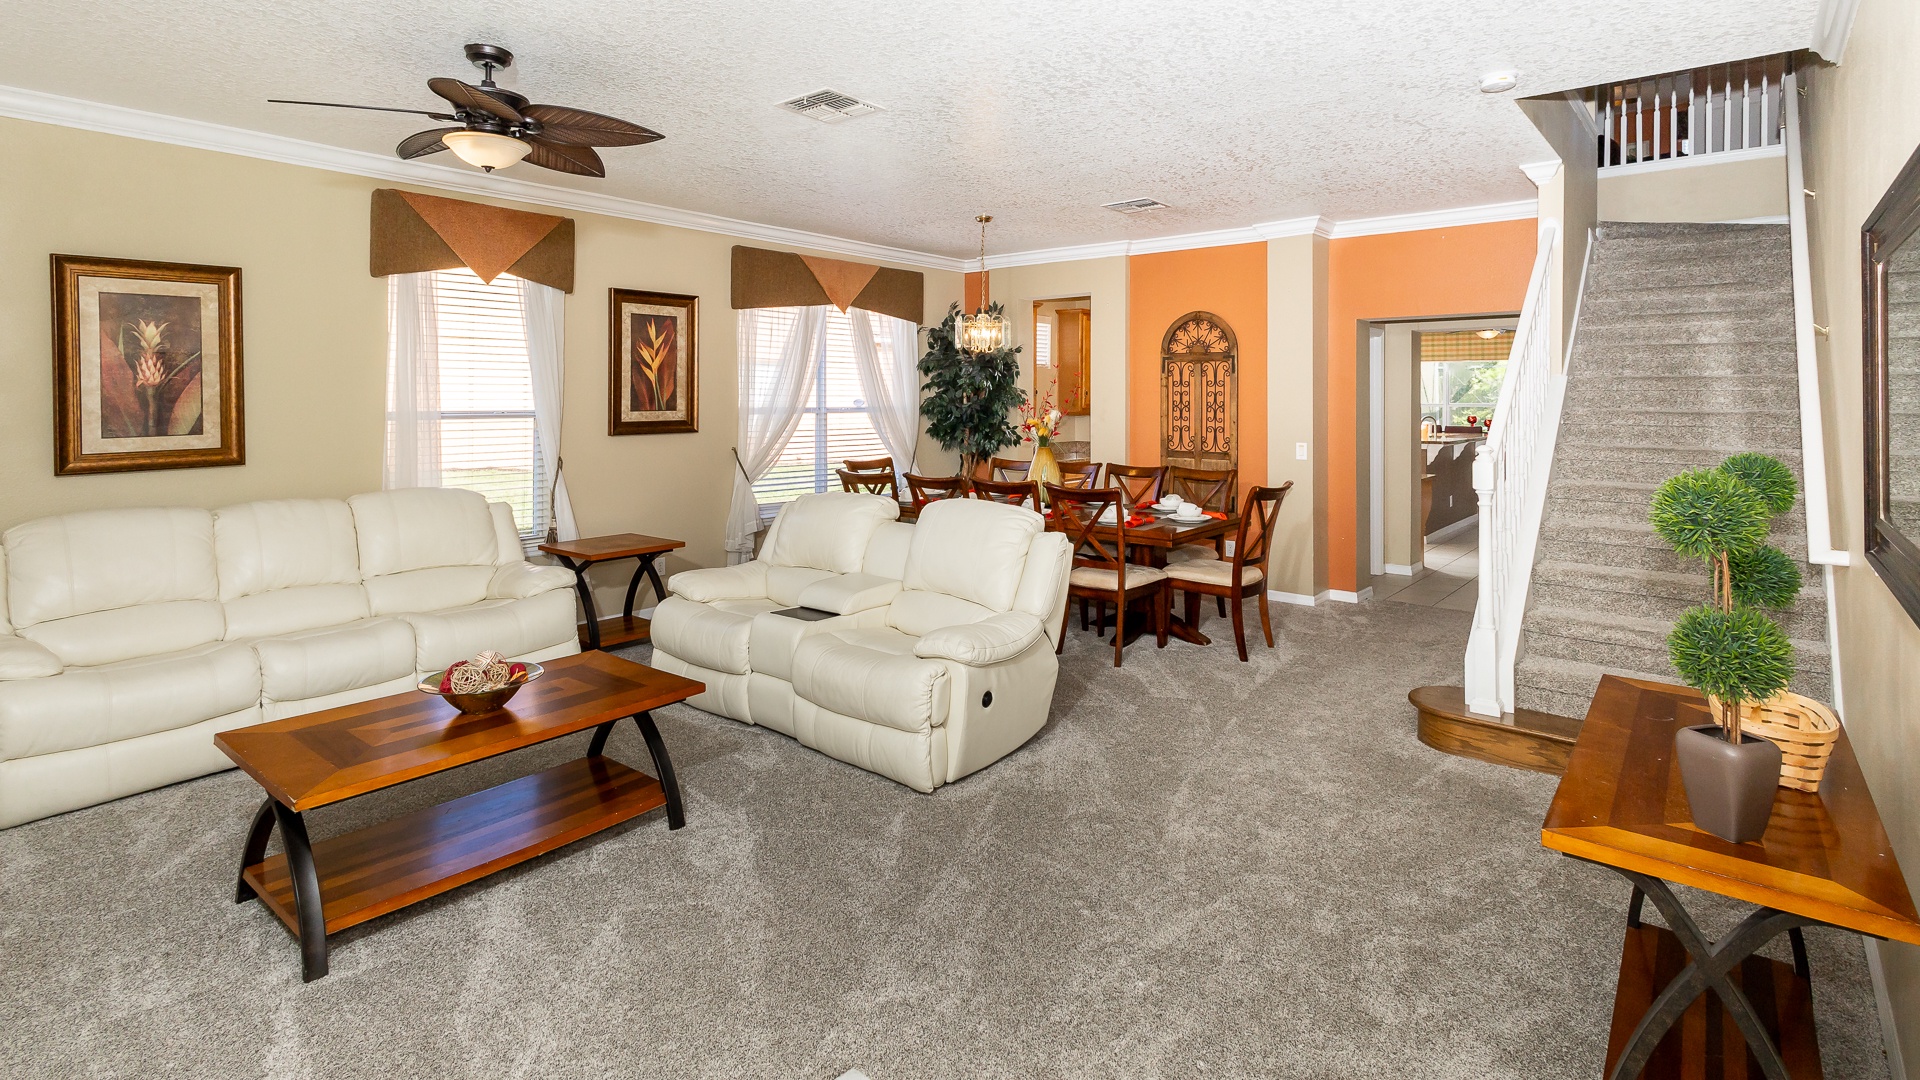 The formal living & dining area (with seating for 10) are prime relaxation spots